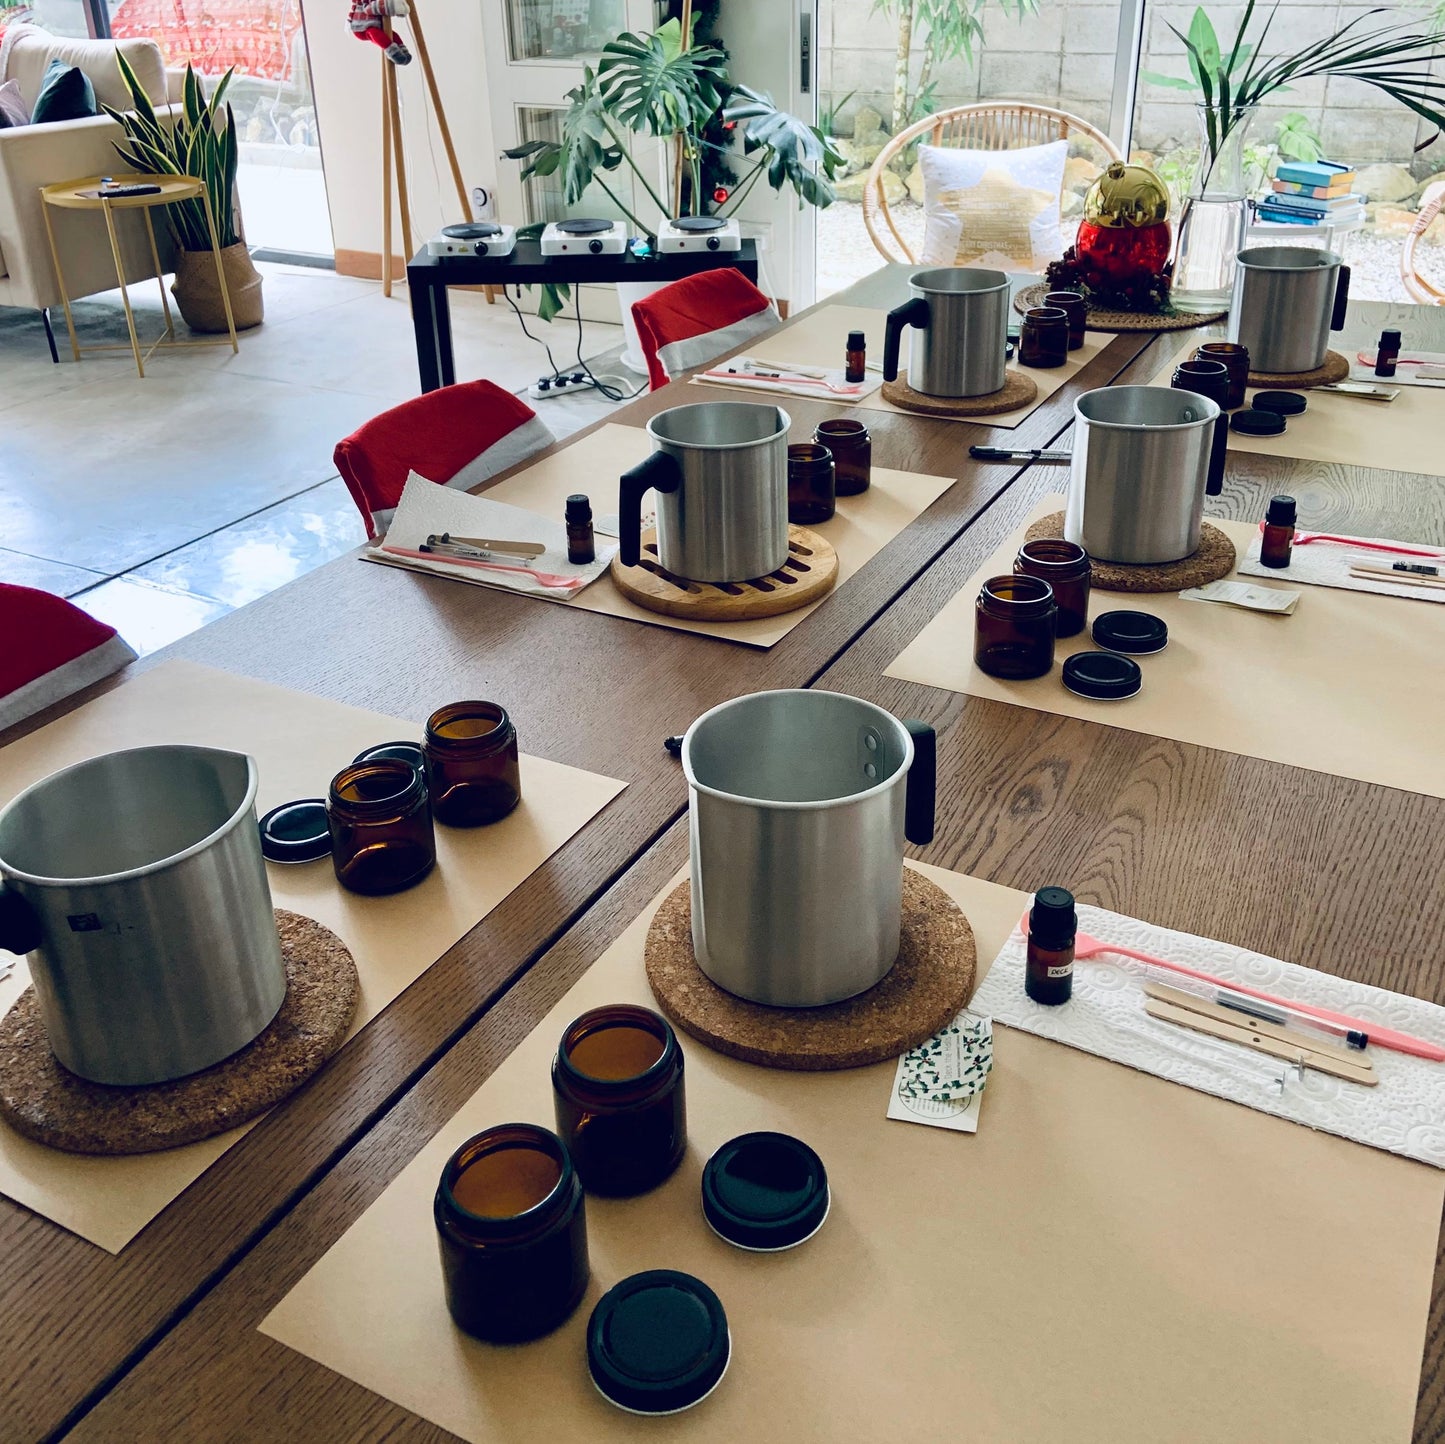 Candle Making Workshop at the NEW Wick Candle Studio